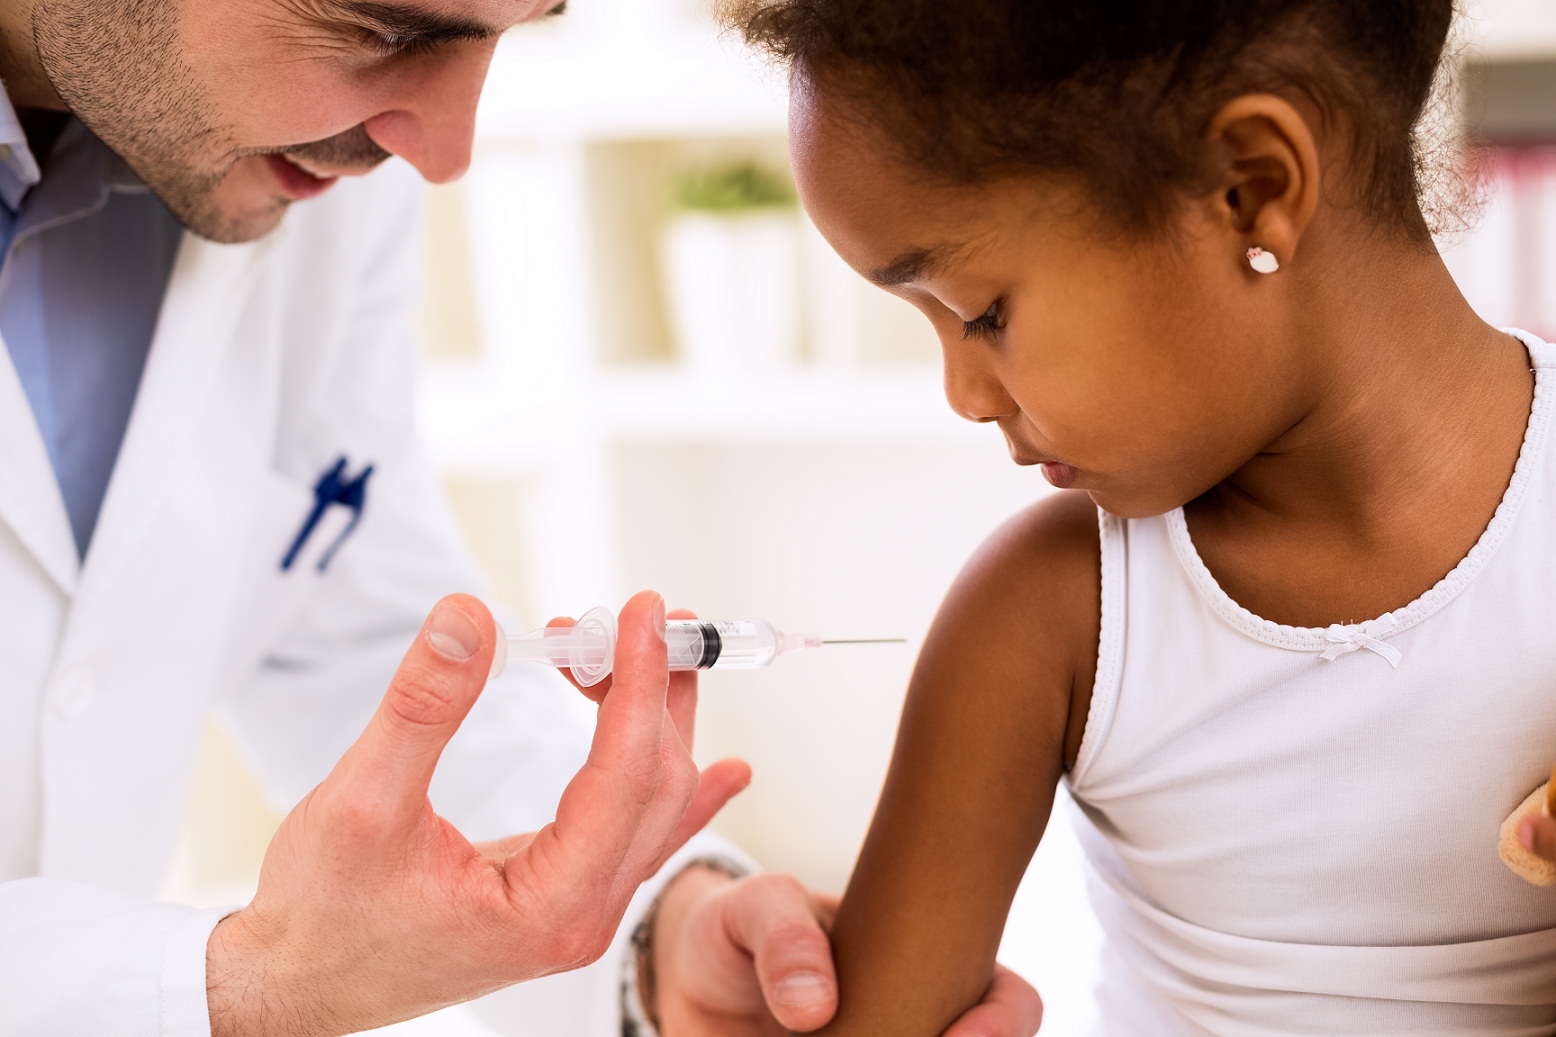 African-American girl getting a vaccine